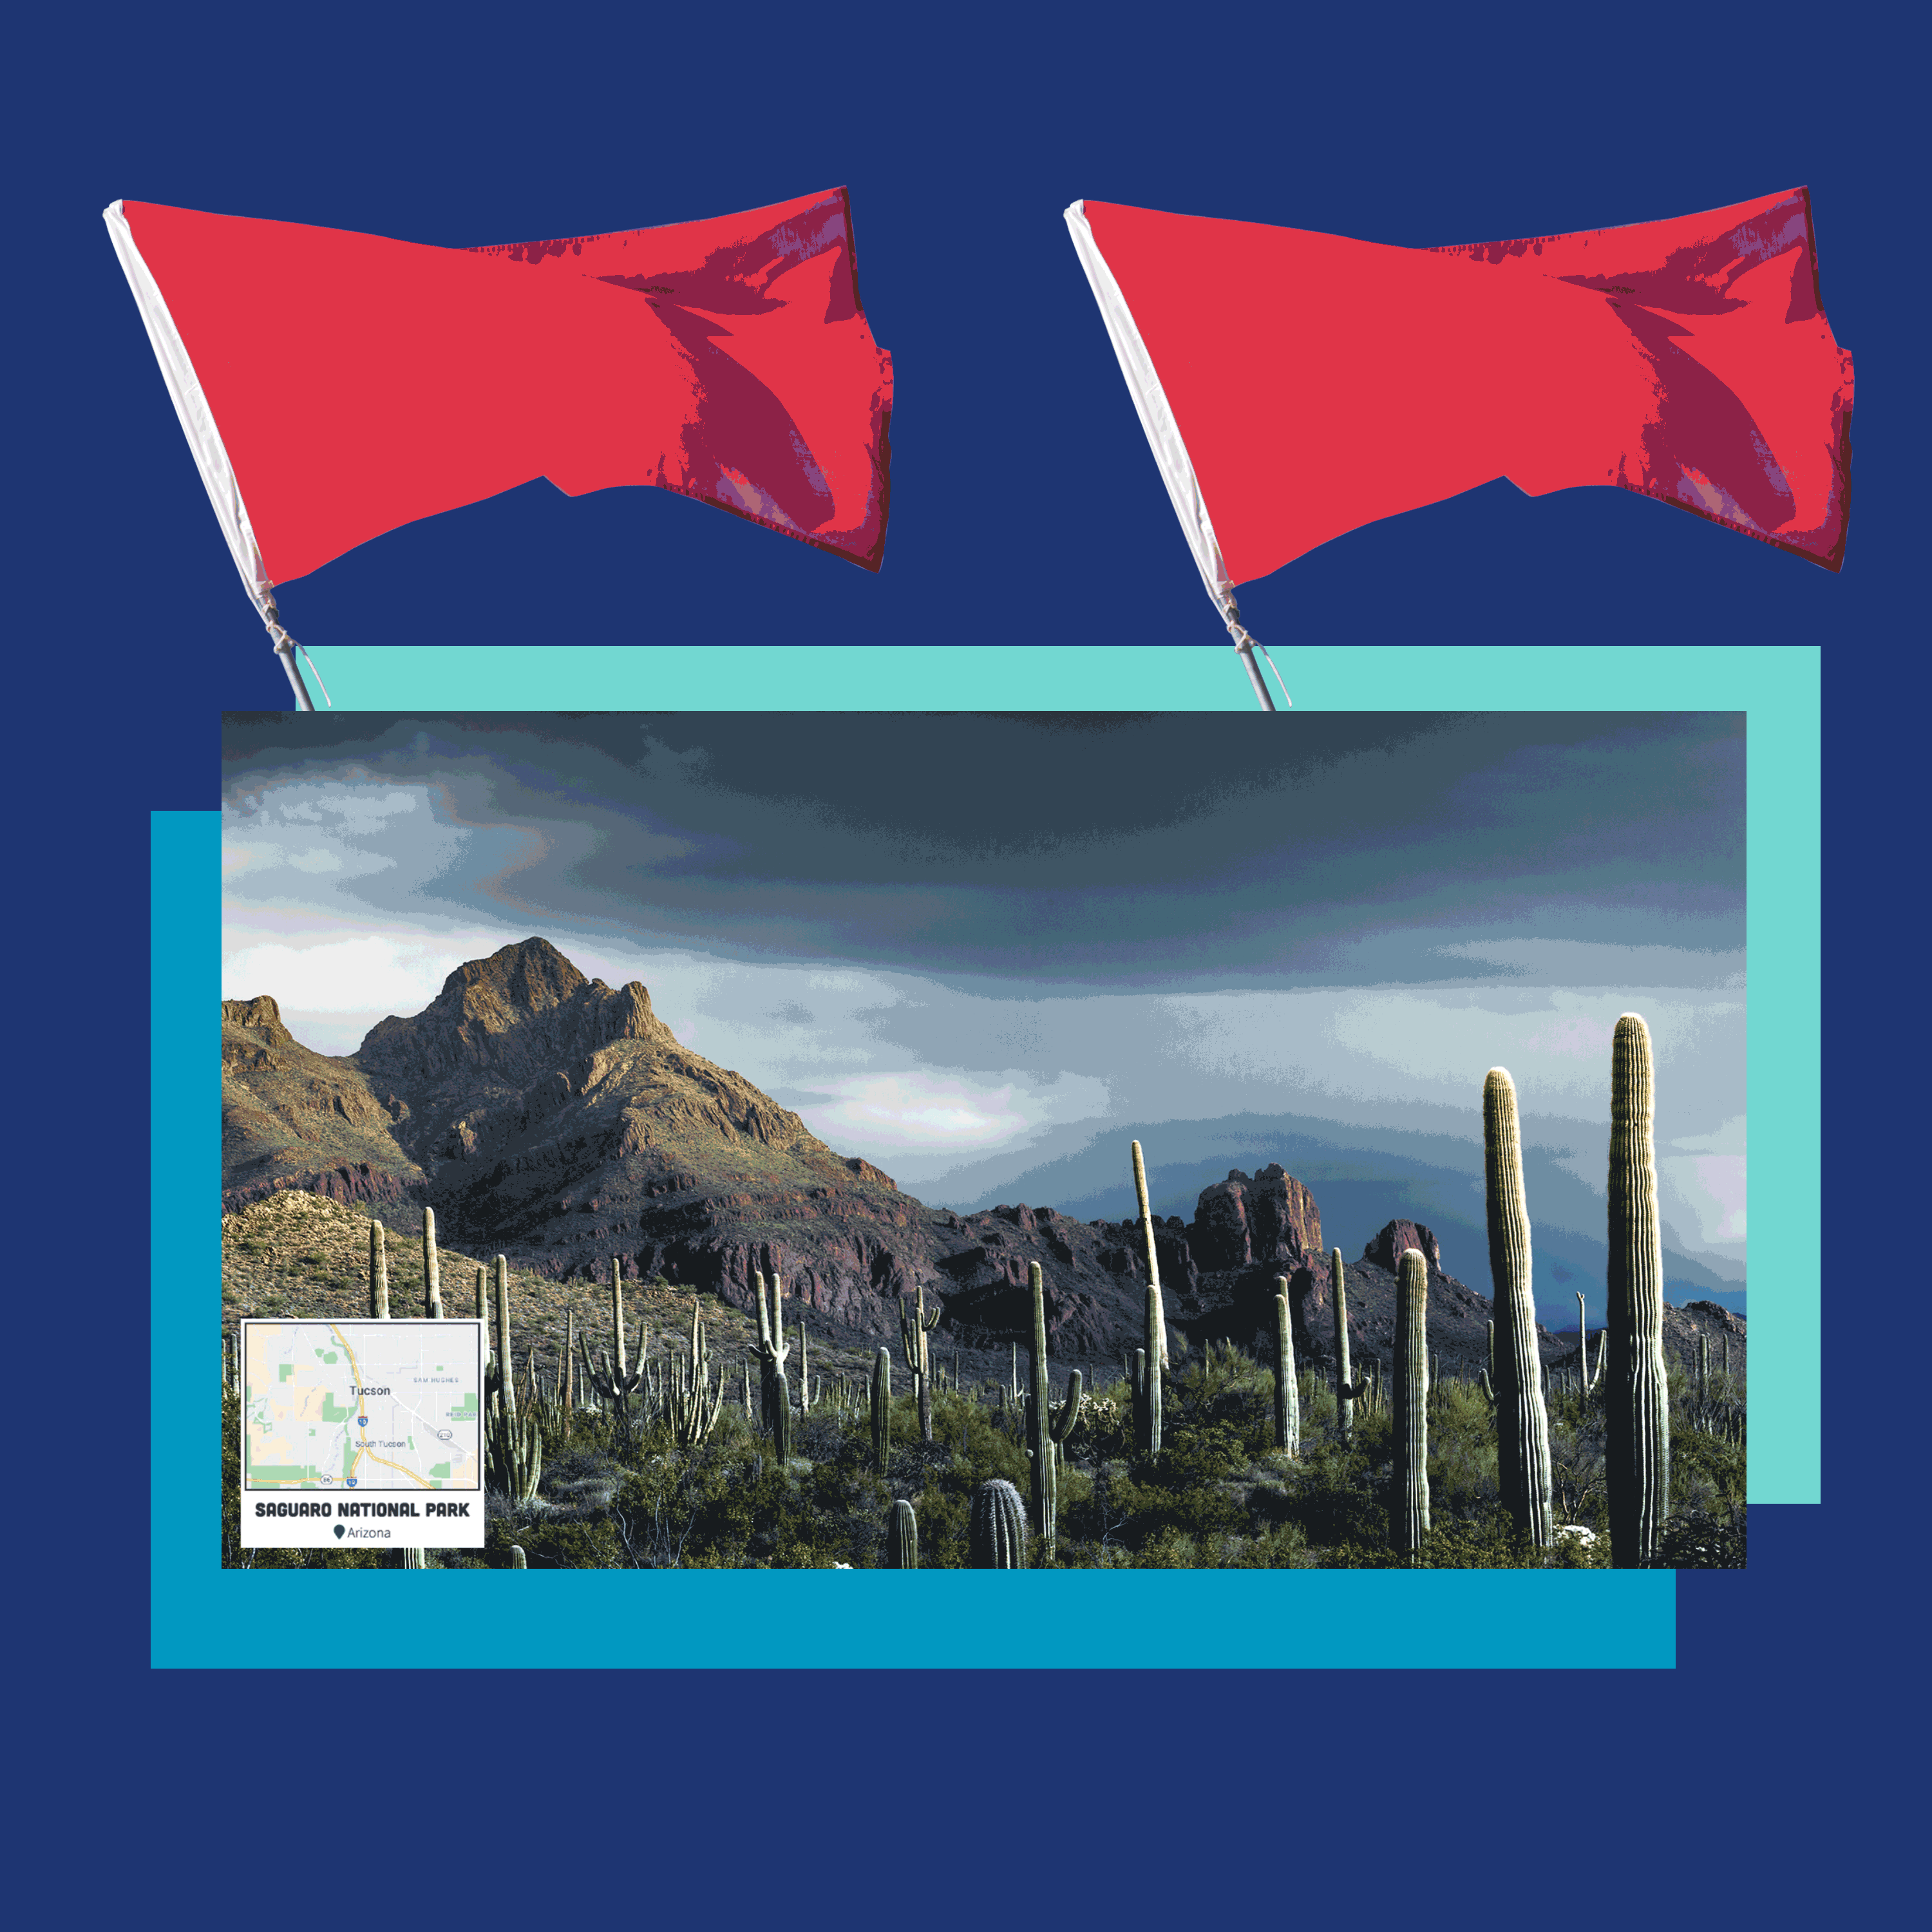 Red flags wave over a before-and-after animated photo of Saguaro National Park in Arizona.